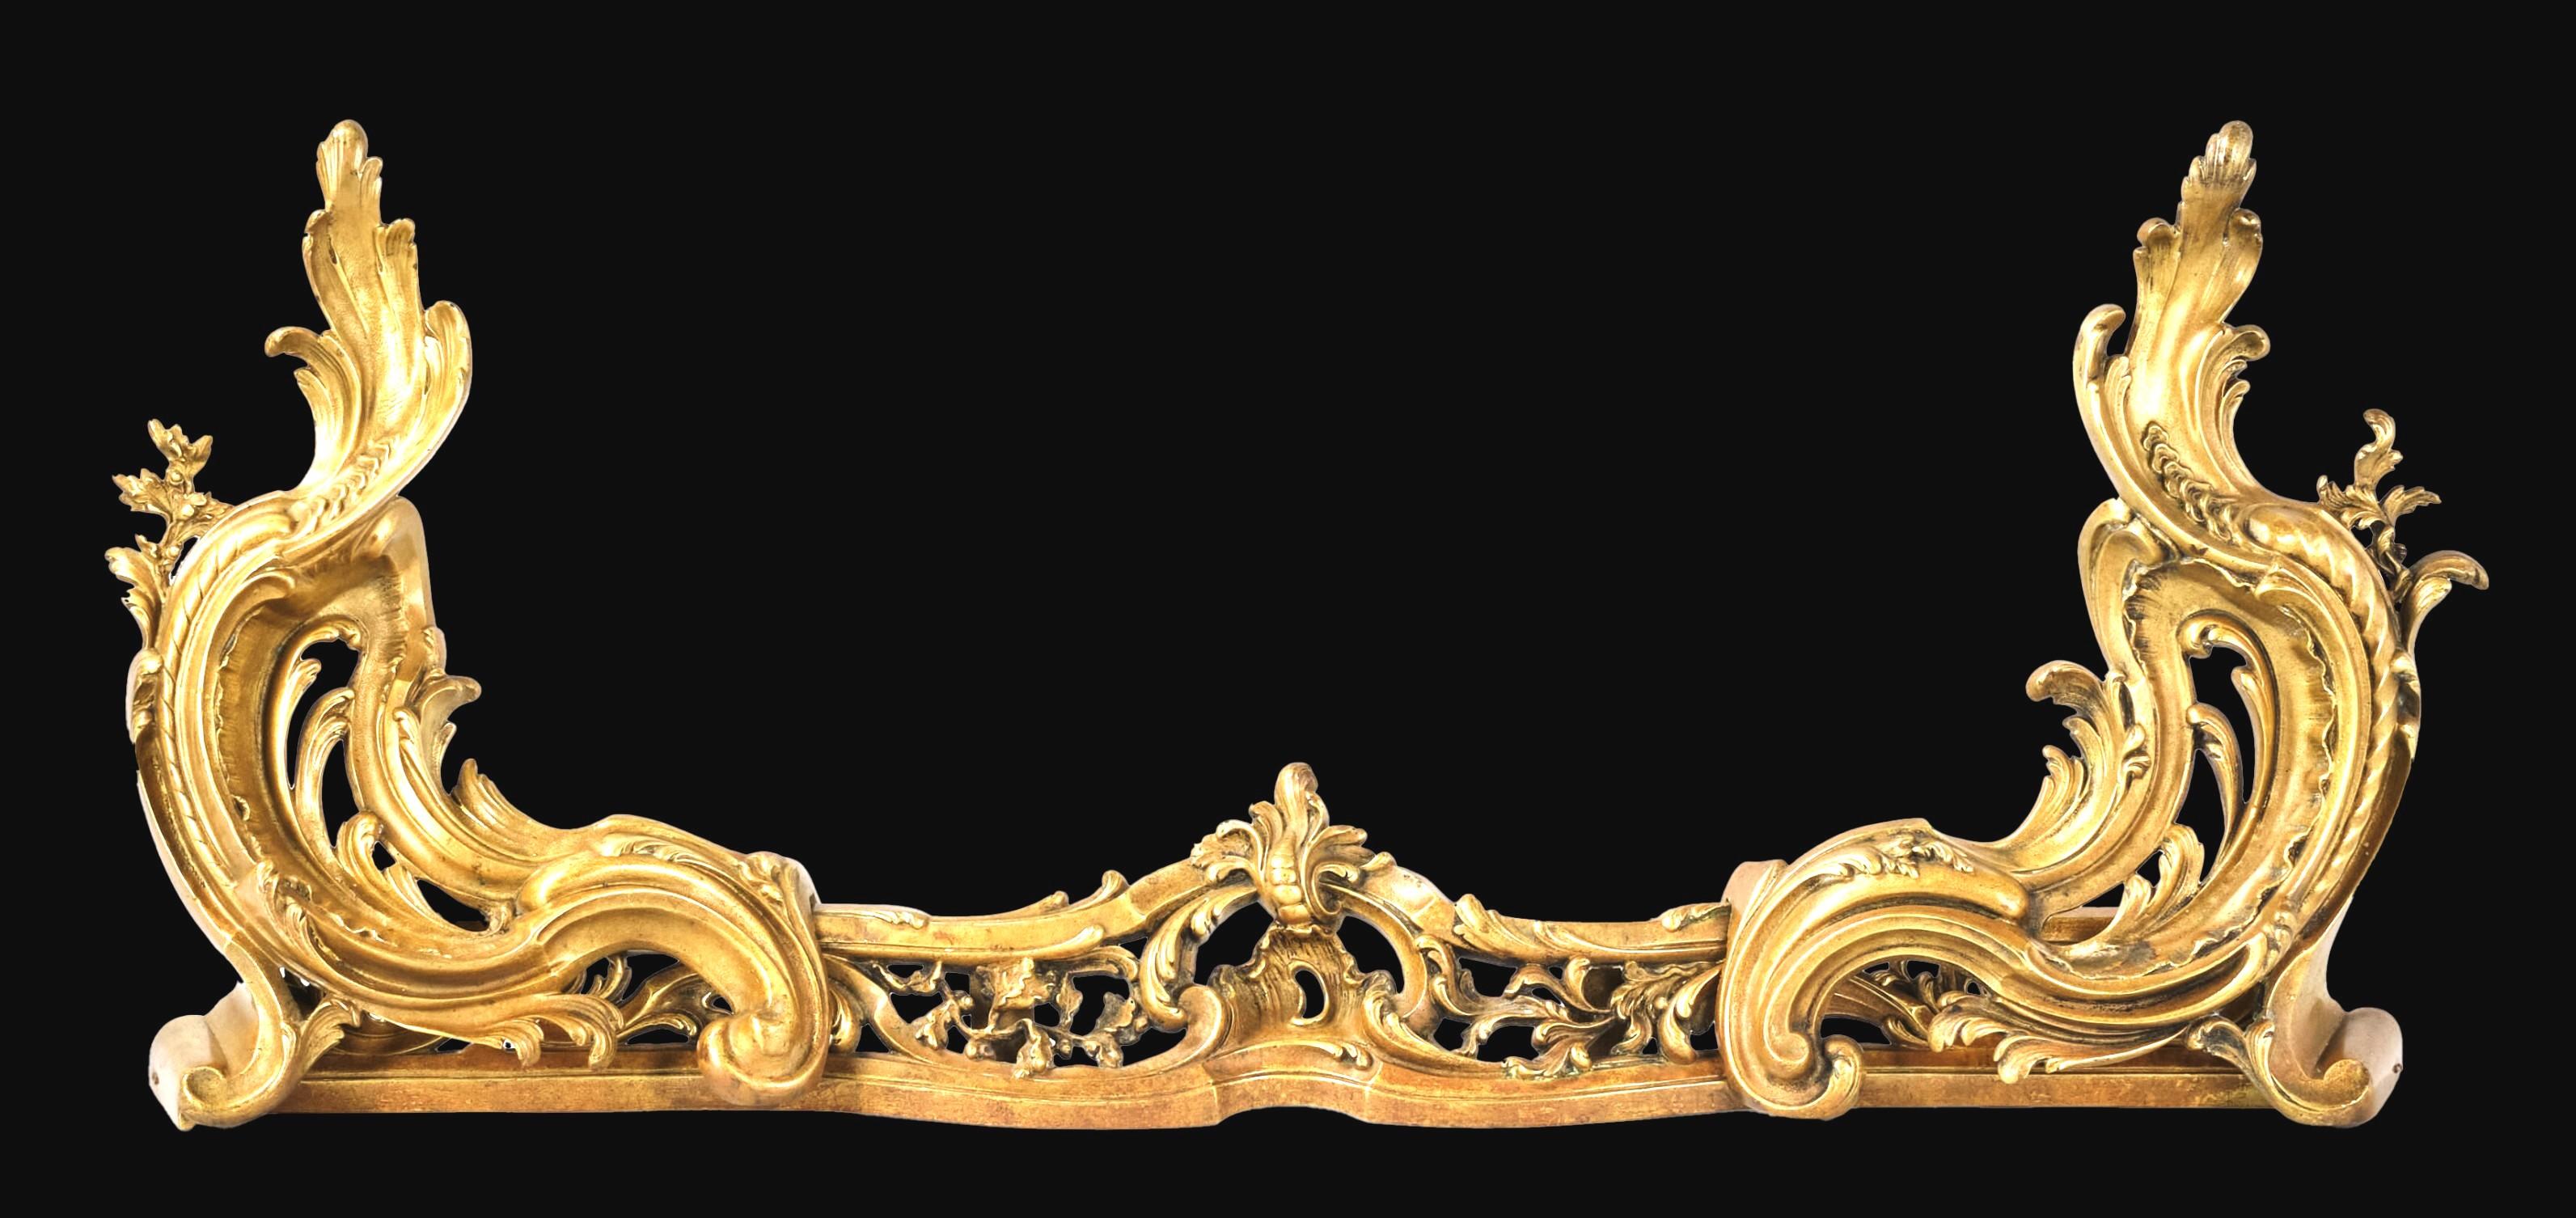 A finely cast & richly gilded 'Belle Epoque' Louis XV style gilt bronze fire fender together with its matching pair of robust gilt bronze chenets. 
Both pierced & foliate cast chenets feature the ability to extend the length of the fender thereby